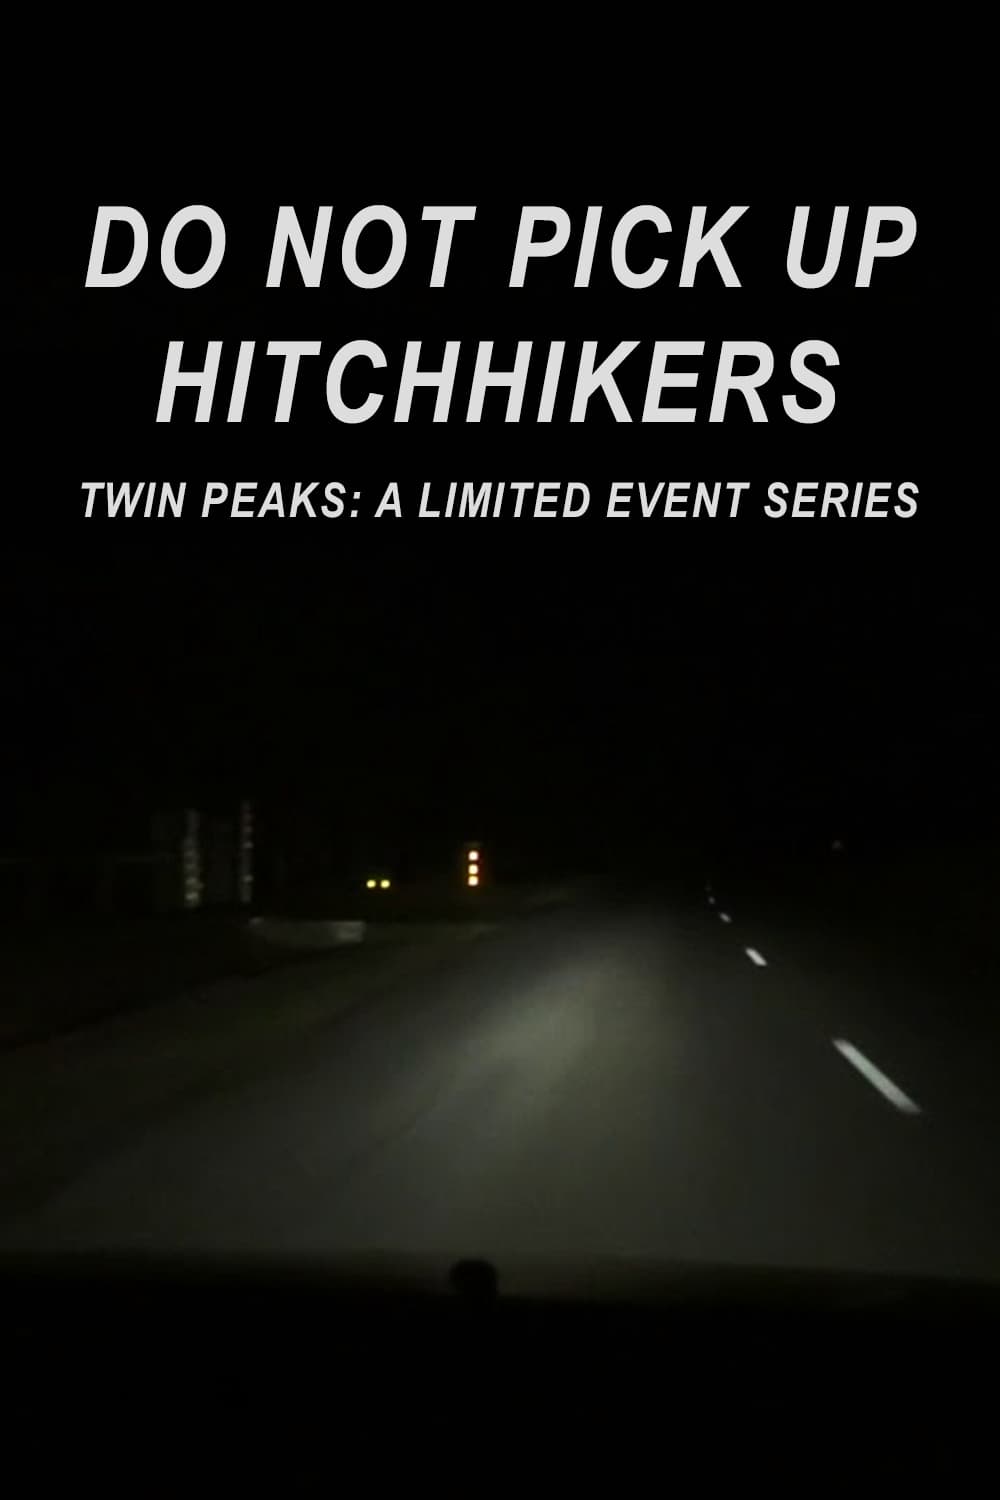 Do Not Pick Up Hitchhikers (2017)